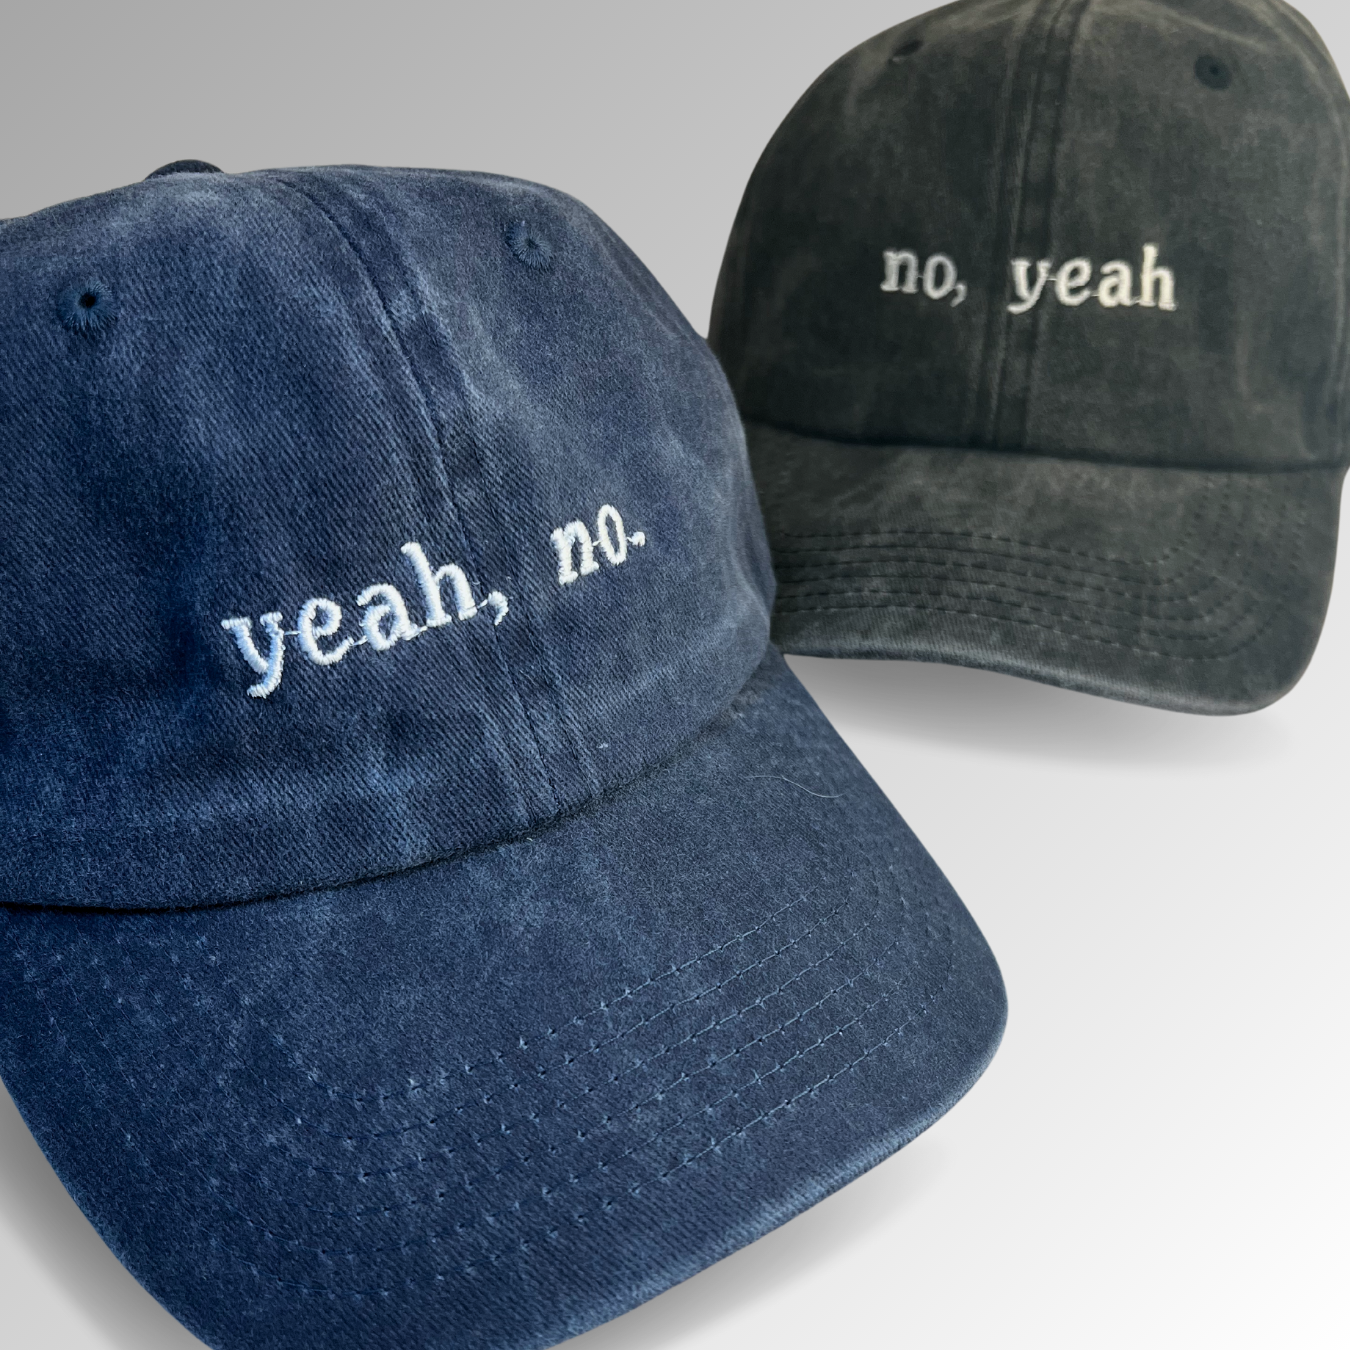 Yeah No Hat / Funny Embroidered Hats / Dad Hat